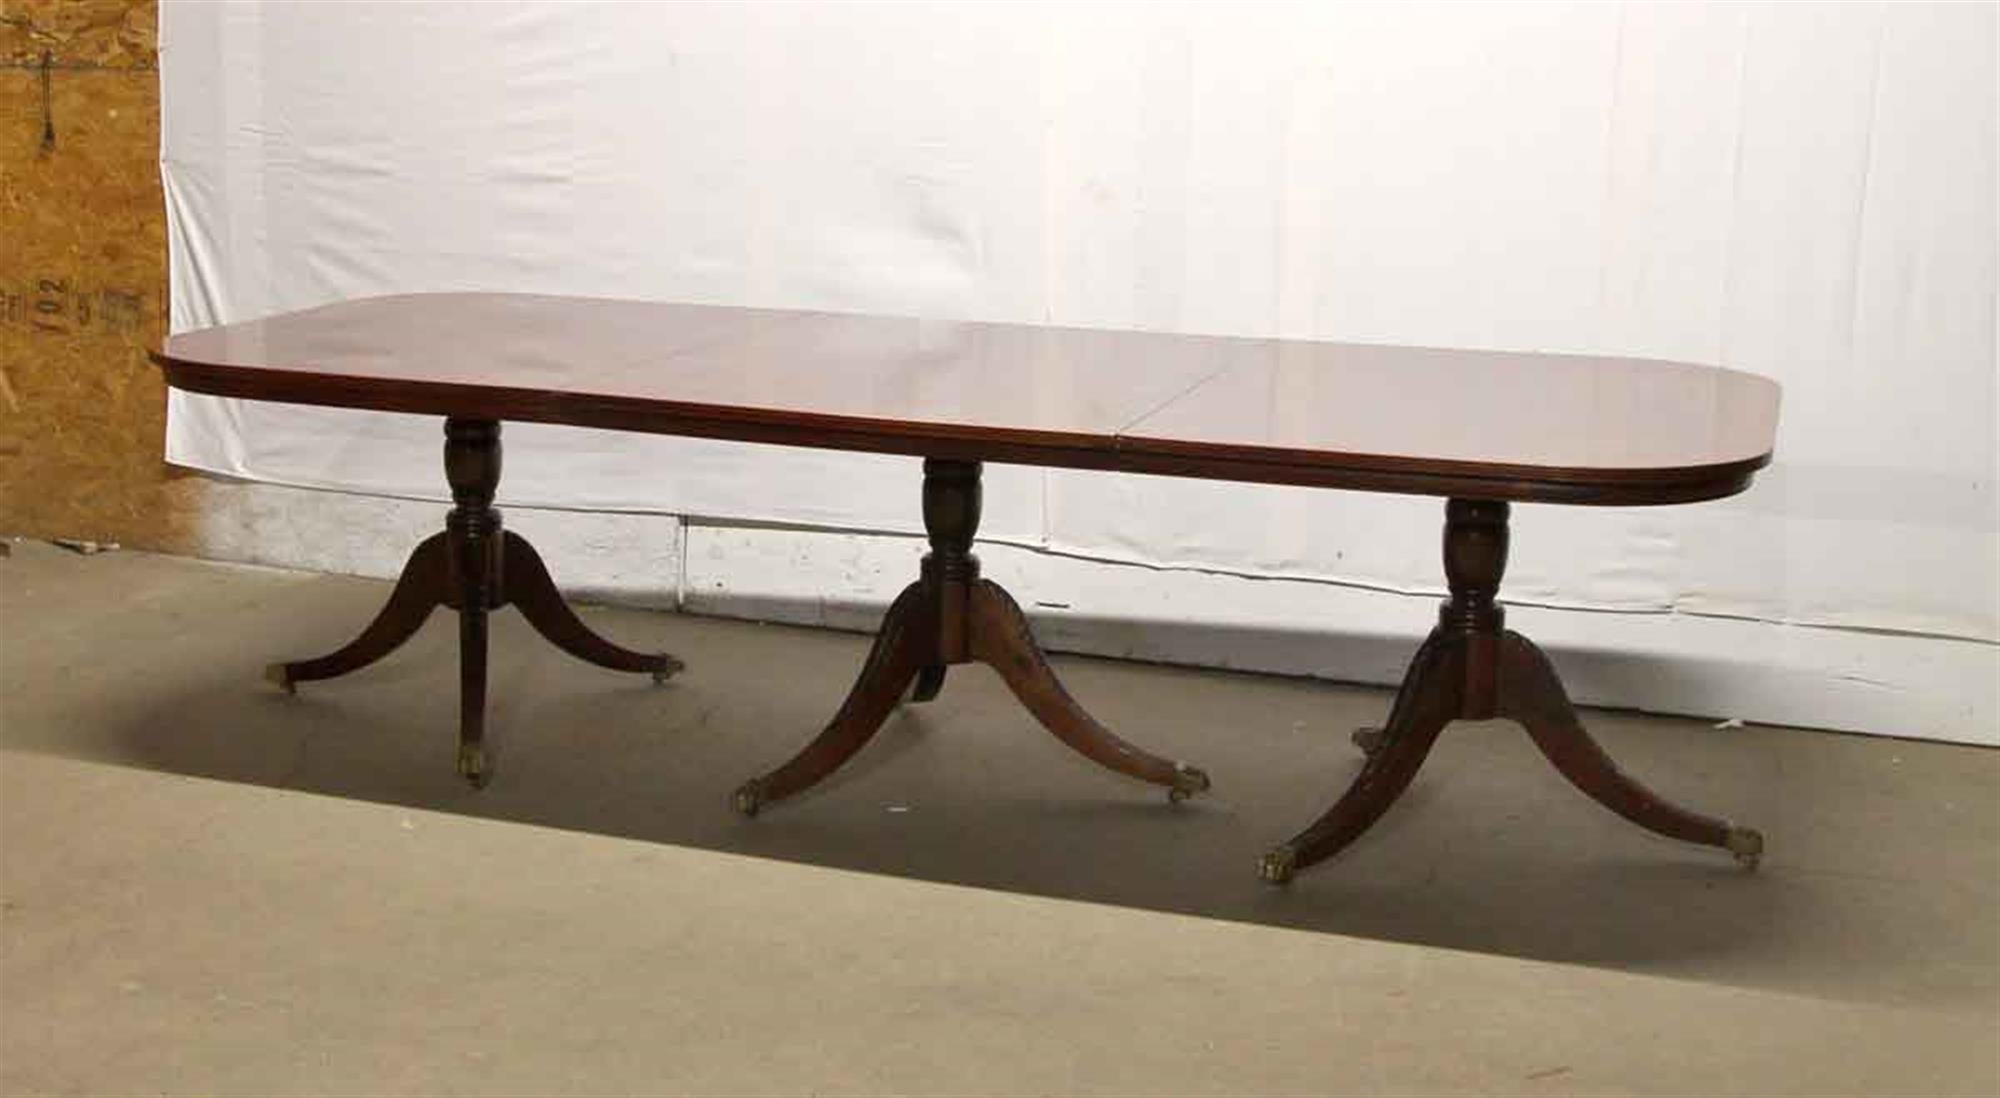 American Duncan Phyfe Style Mahogany Dining Table with Extensions and Brass Feet